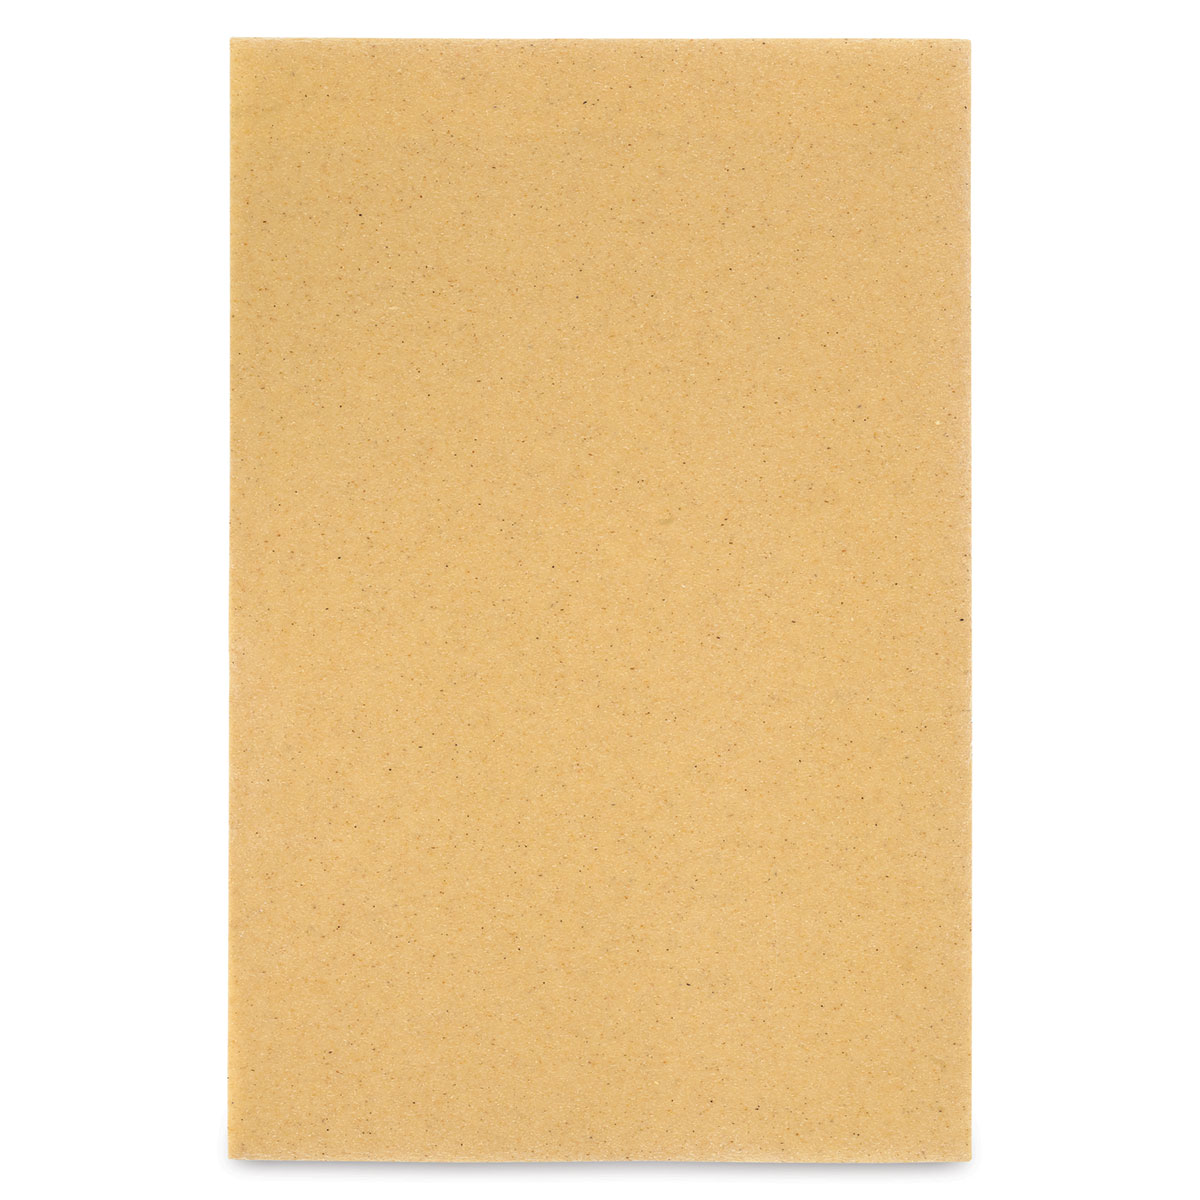 Worbla Thermoplastic Sheets (All Styles Listed Here) Original / Small 9x10